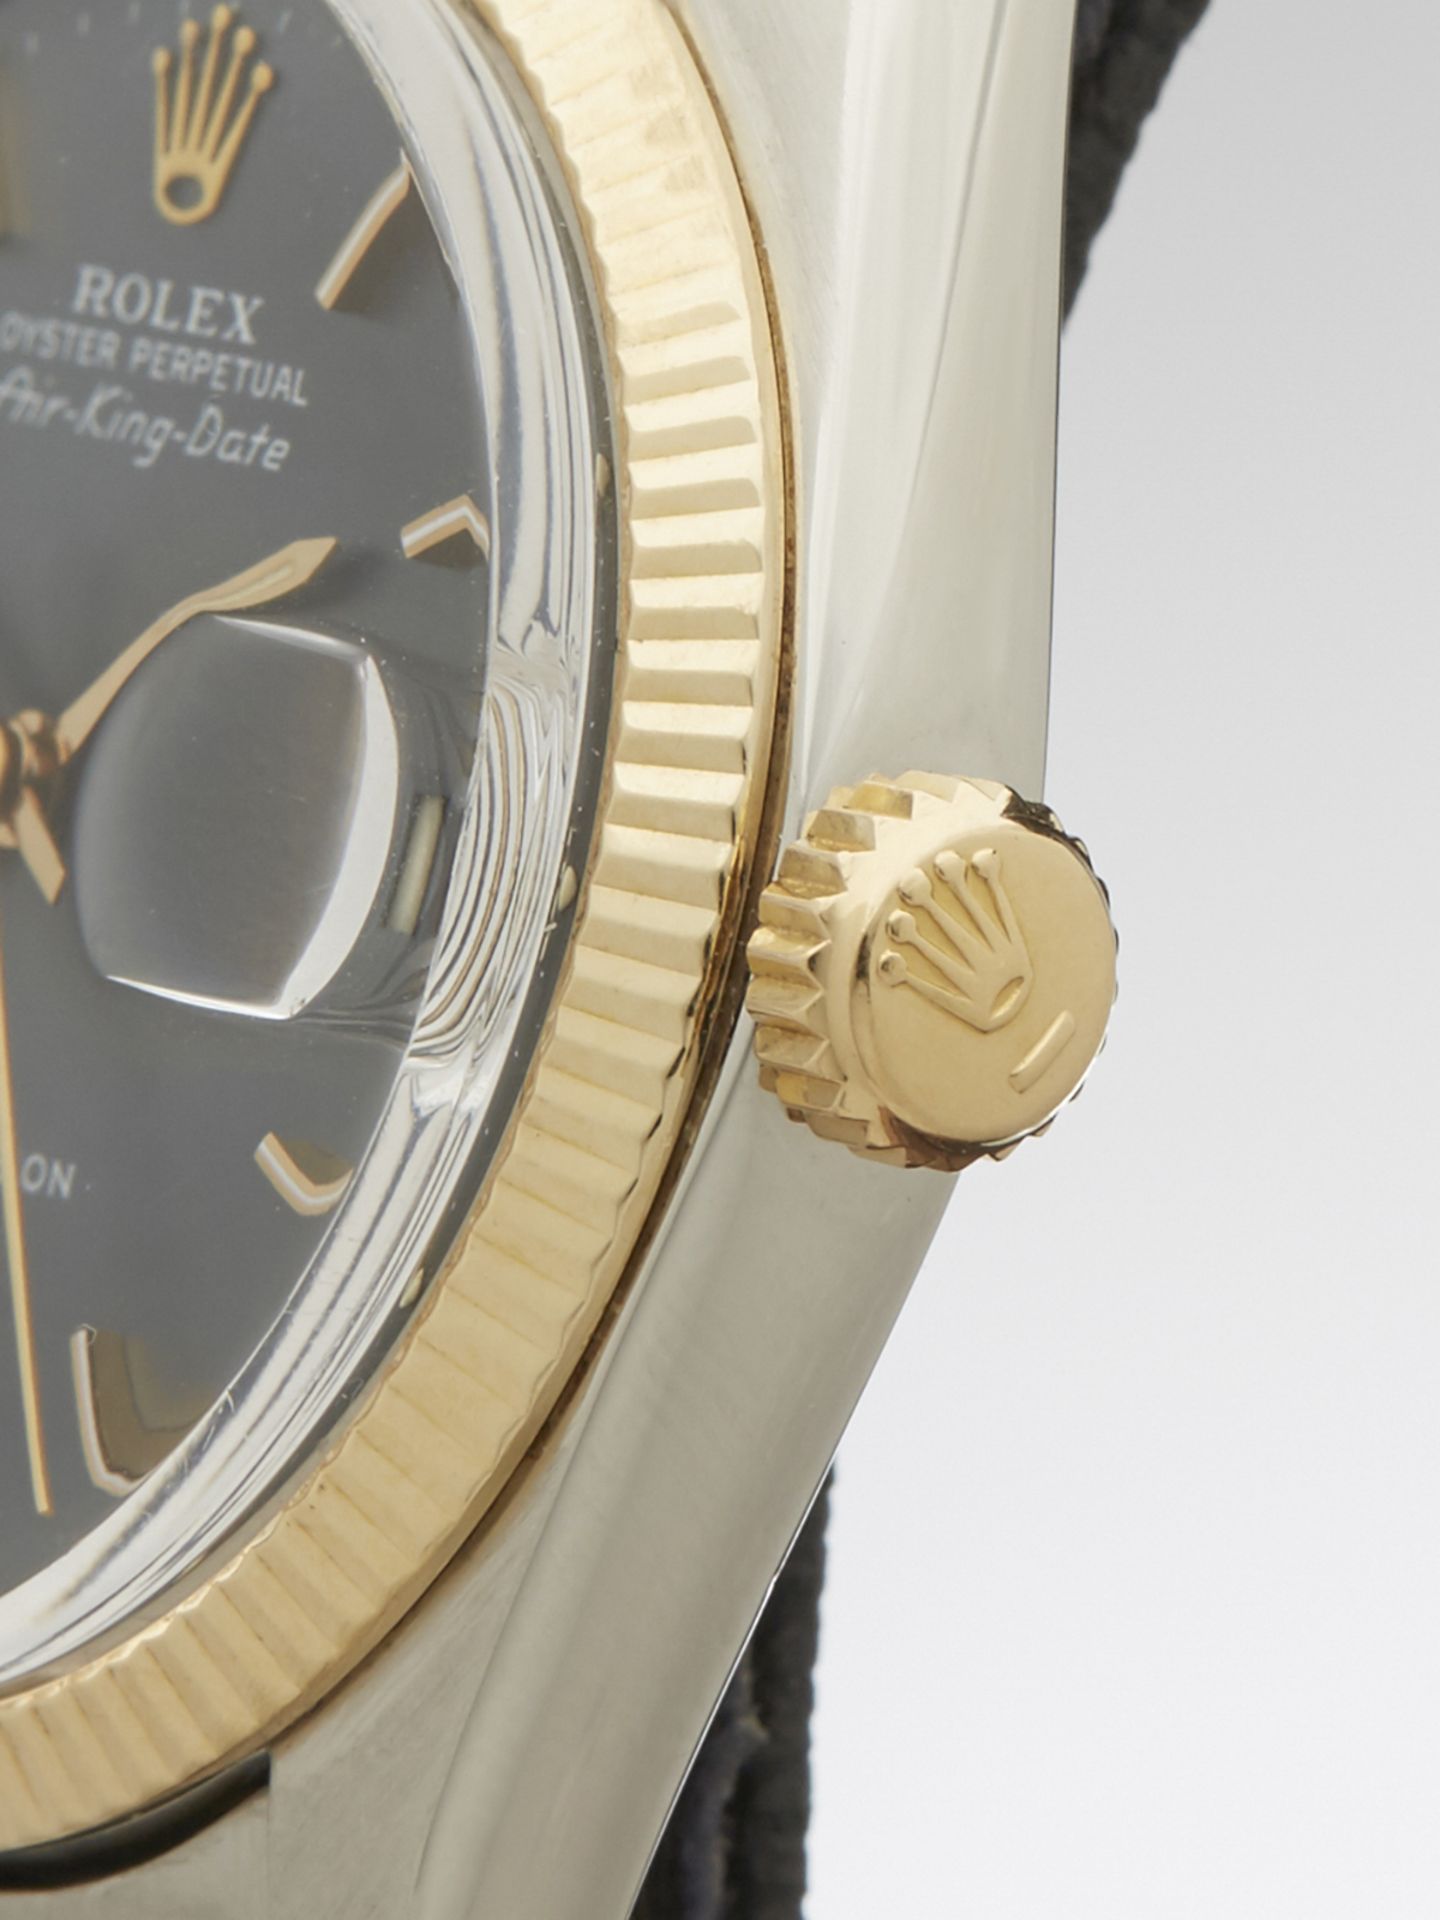 1978 Rolex, Air King Date, Rare Gold Bezel and Crown - Image 4 of 10